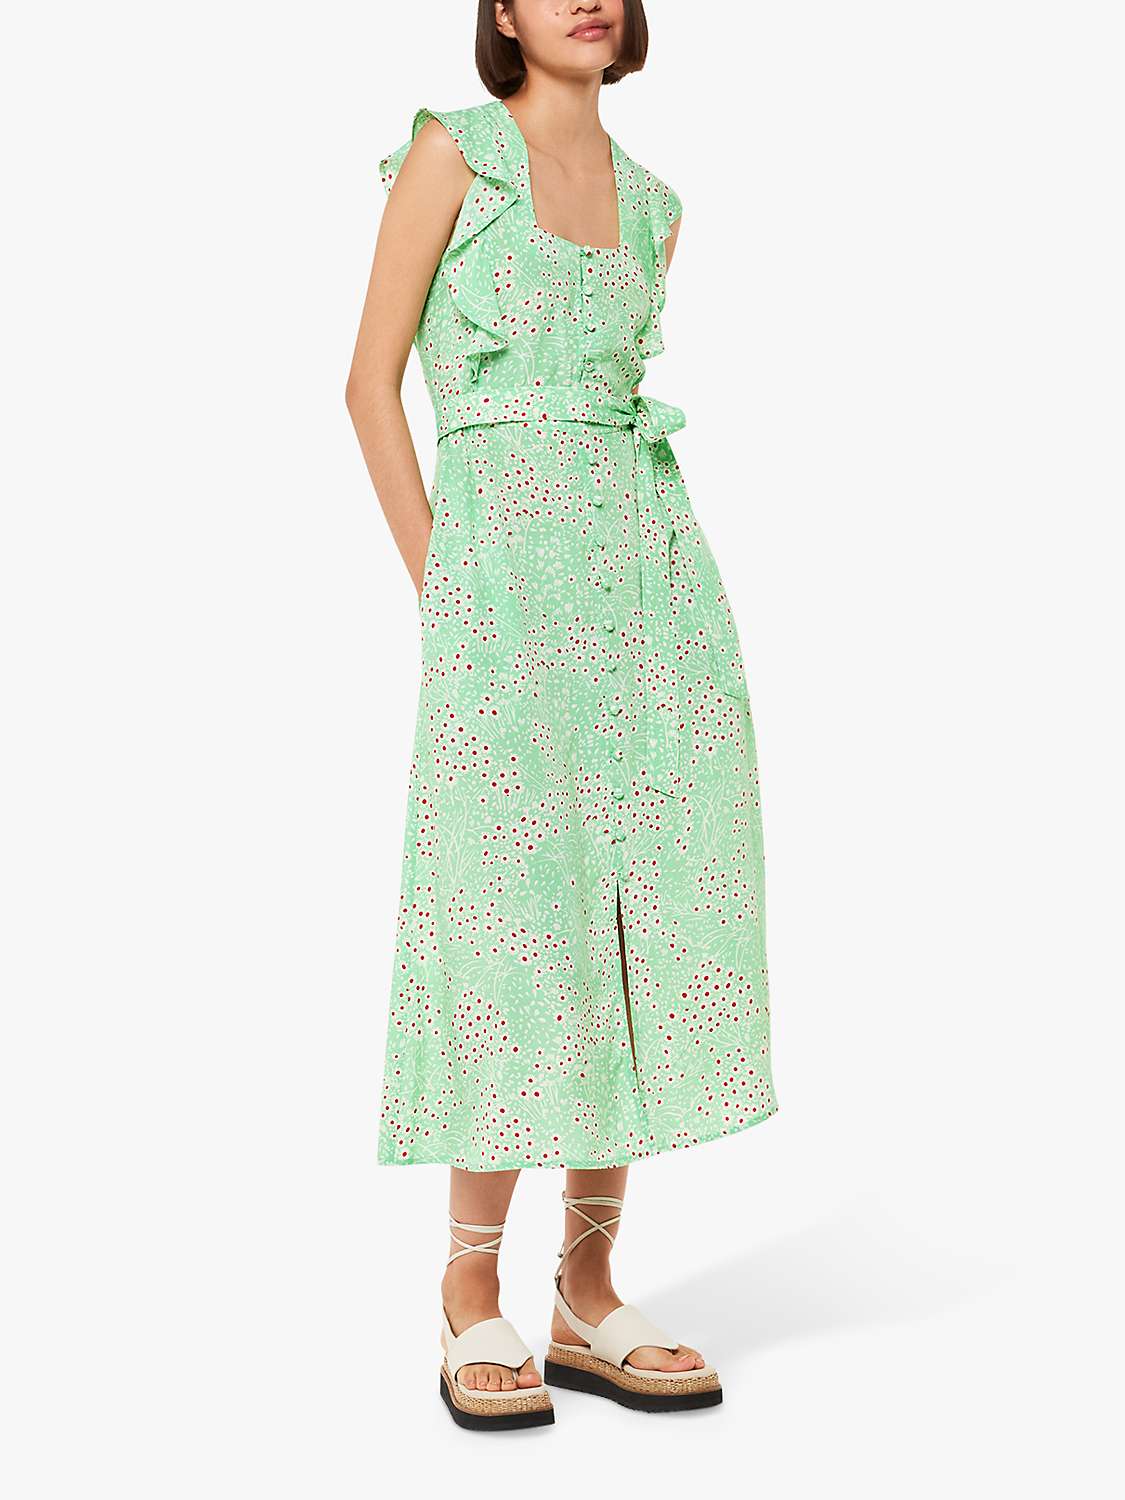 Buy Whistles Sophie Daisy Meadow Print Midi Dress, Green/Multi Online at johnlewis.com